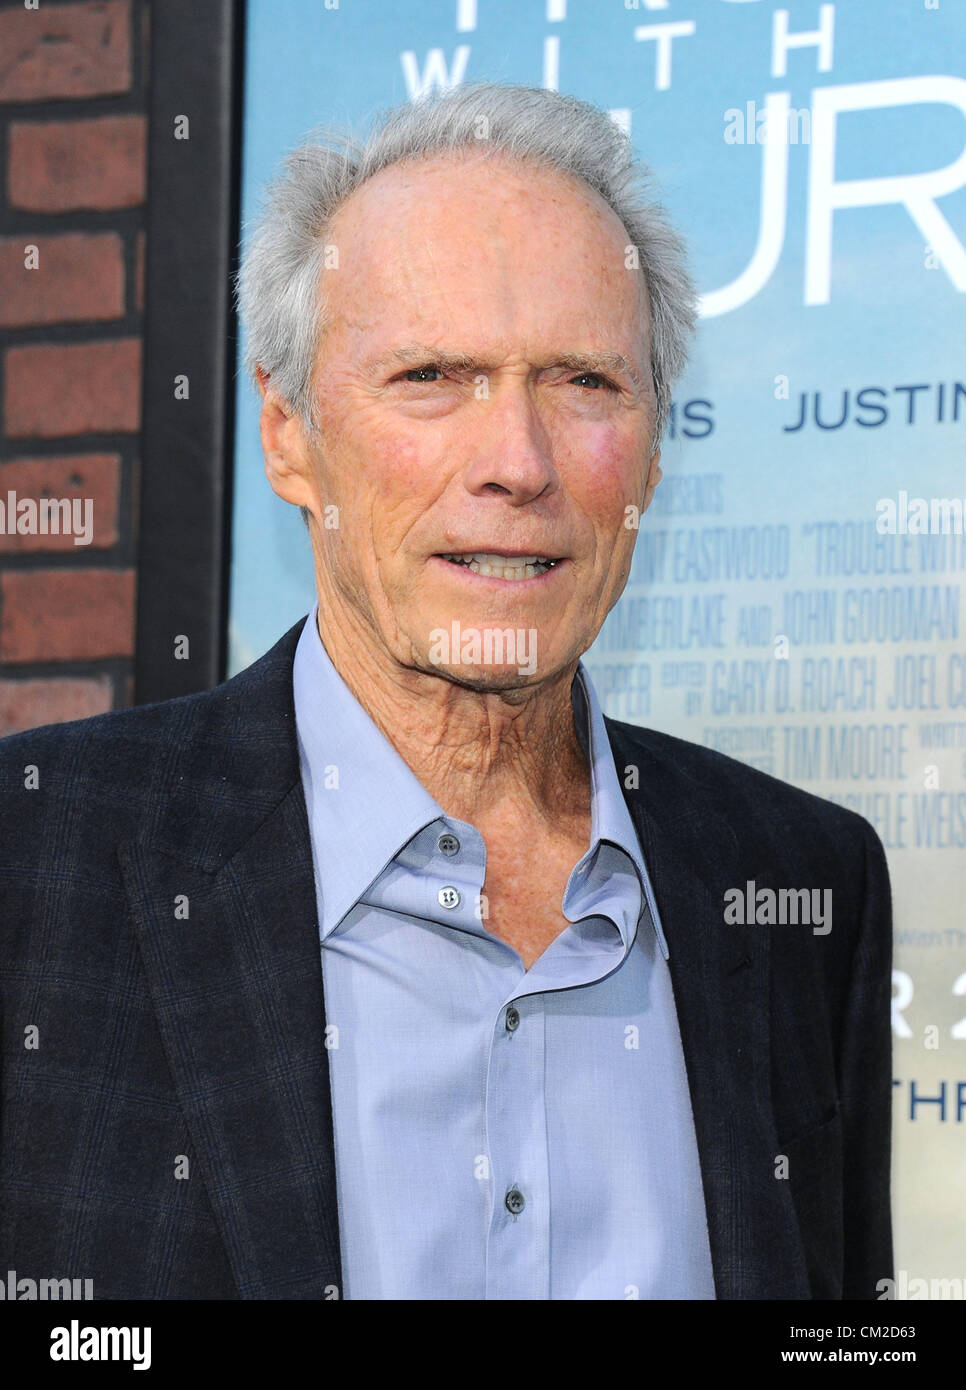 Clint Eastwood at the 'Trouble with the Curve' film premiere in Los Angeles, CA Sept 19th 2012 photo by Sydney Alford Stock Photo